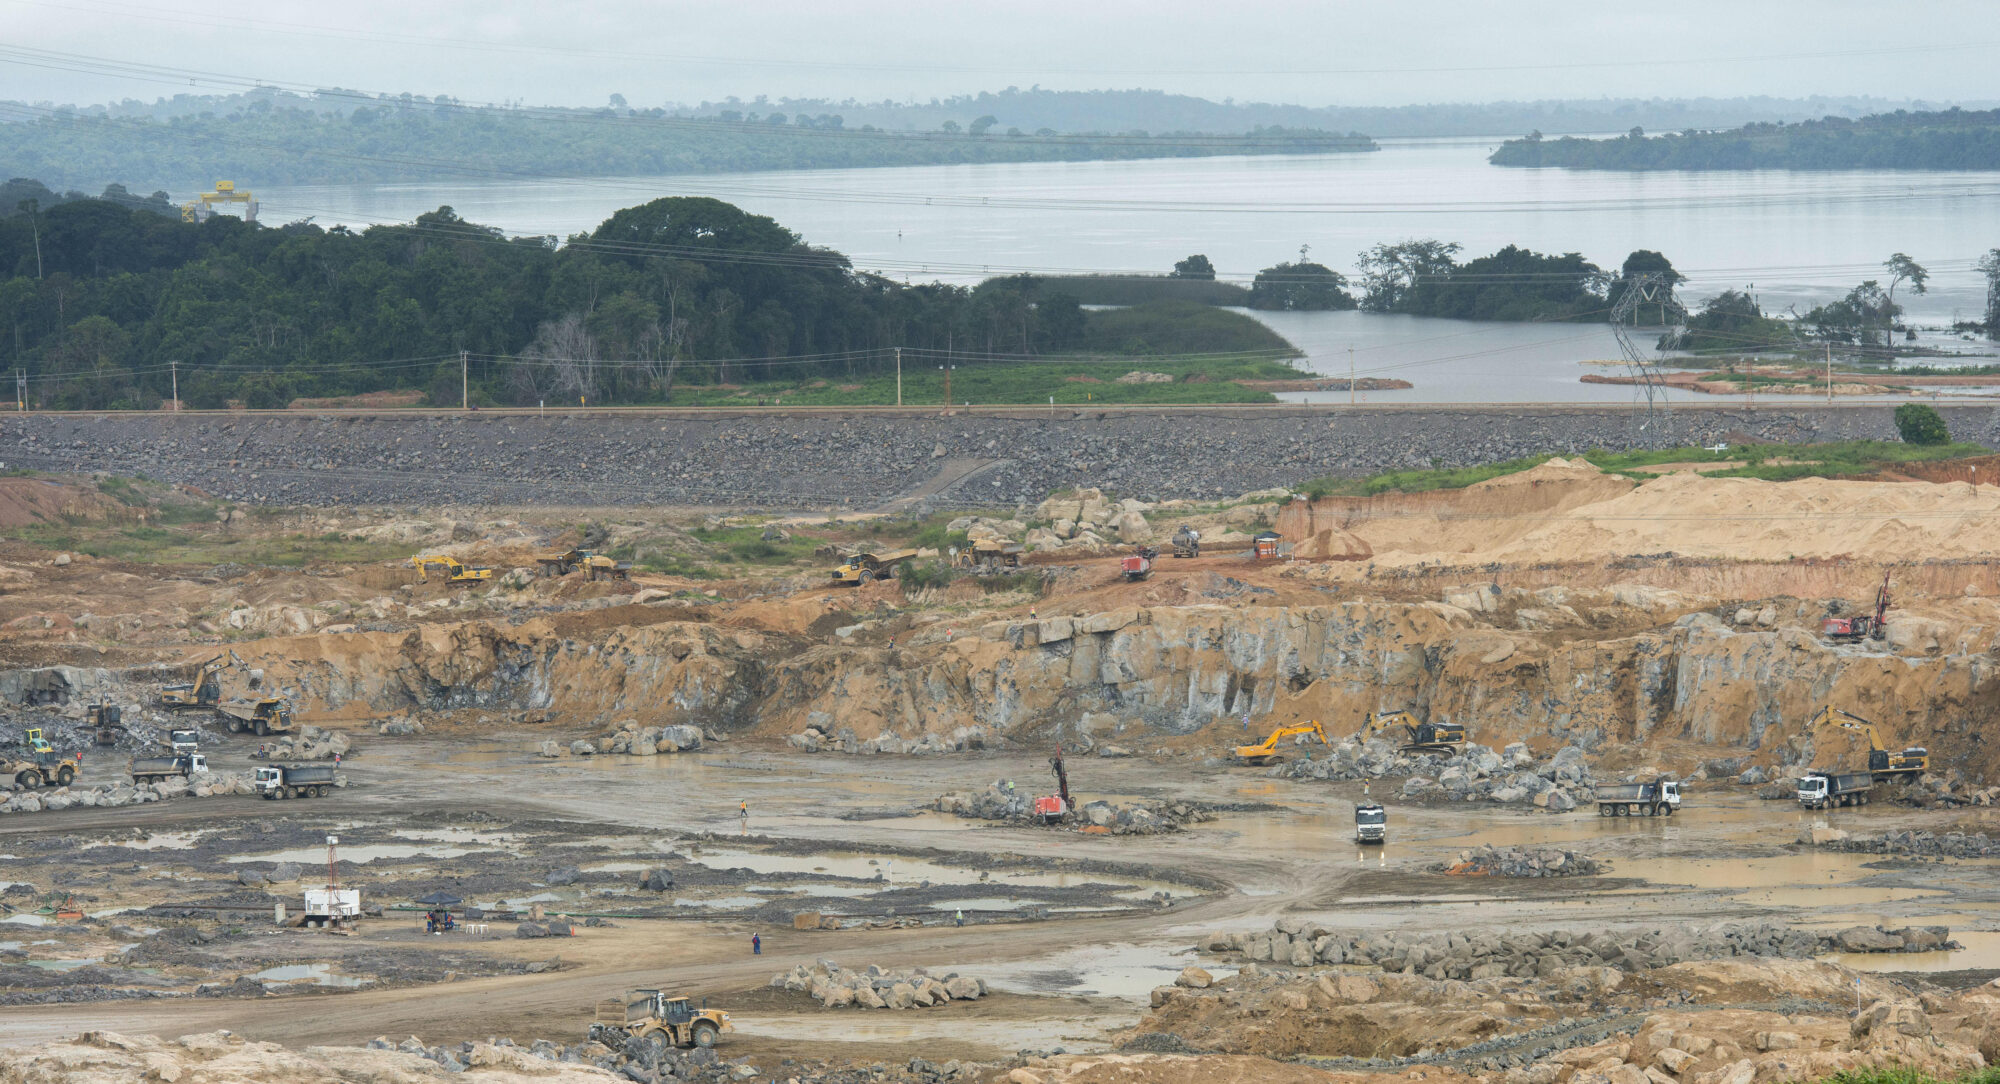 <p>Construction of the Belo Monte hydroelectric plant in the Brazilian Amazon, pictured in 2014. The mega-project has been the subject of investigations for impacting indigenous rights and the environment (image: Alamy)</p>